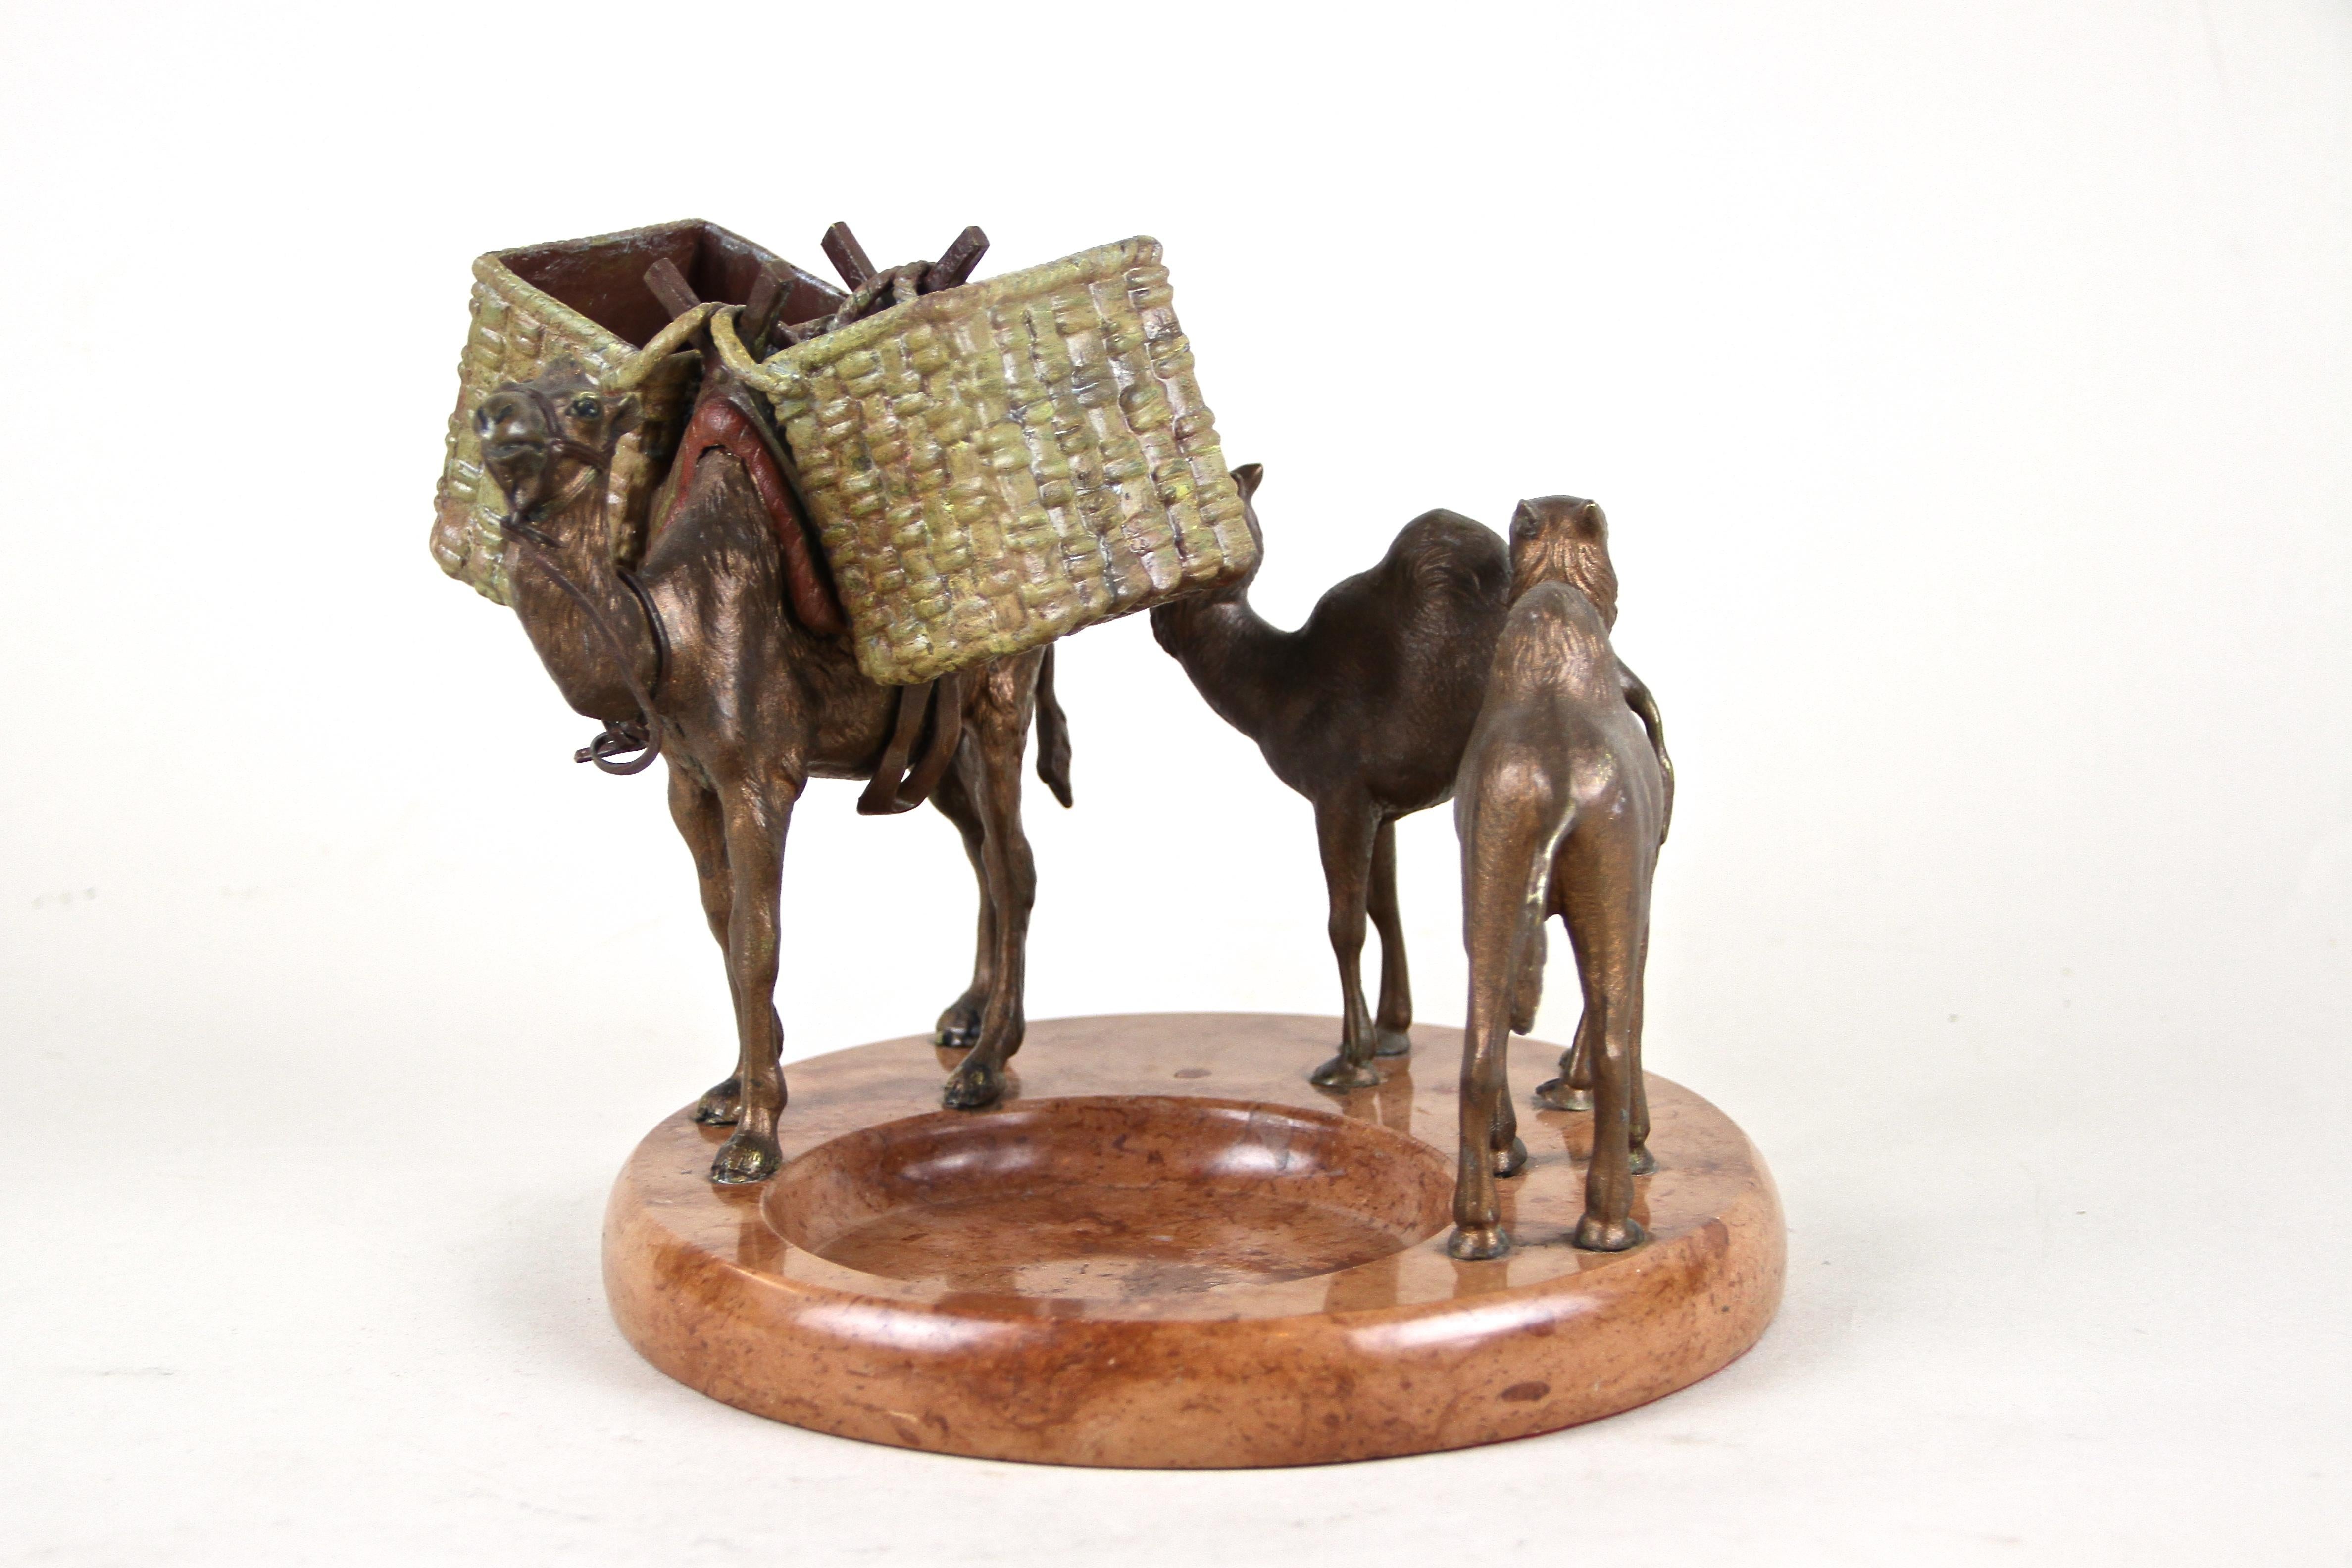 Fine Vienna bronze camel sculptures on red marble bowl from the period around 1920 in Austria. The decorative round bowl/ ashtray made of red marble is adorned by three artfully designed full bronze Arabian camels (a female with her small ones)